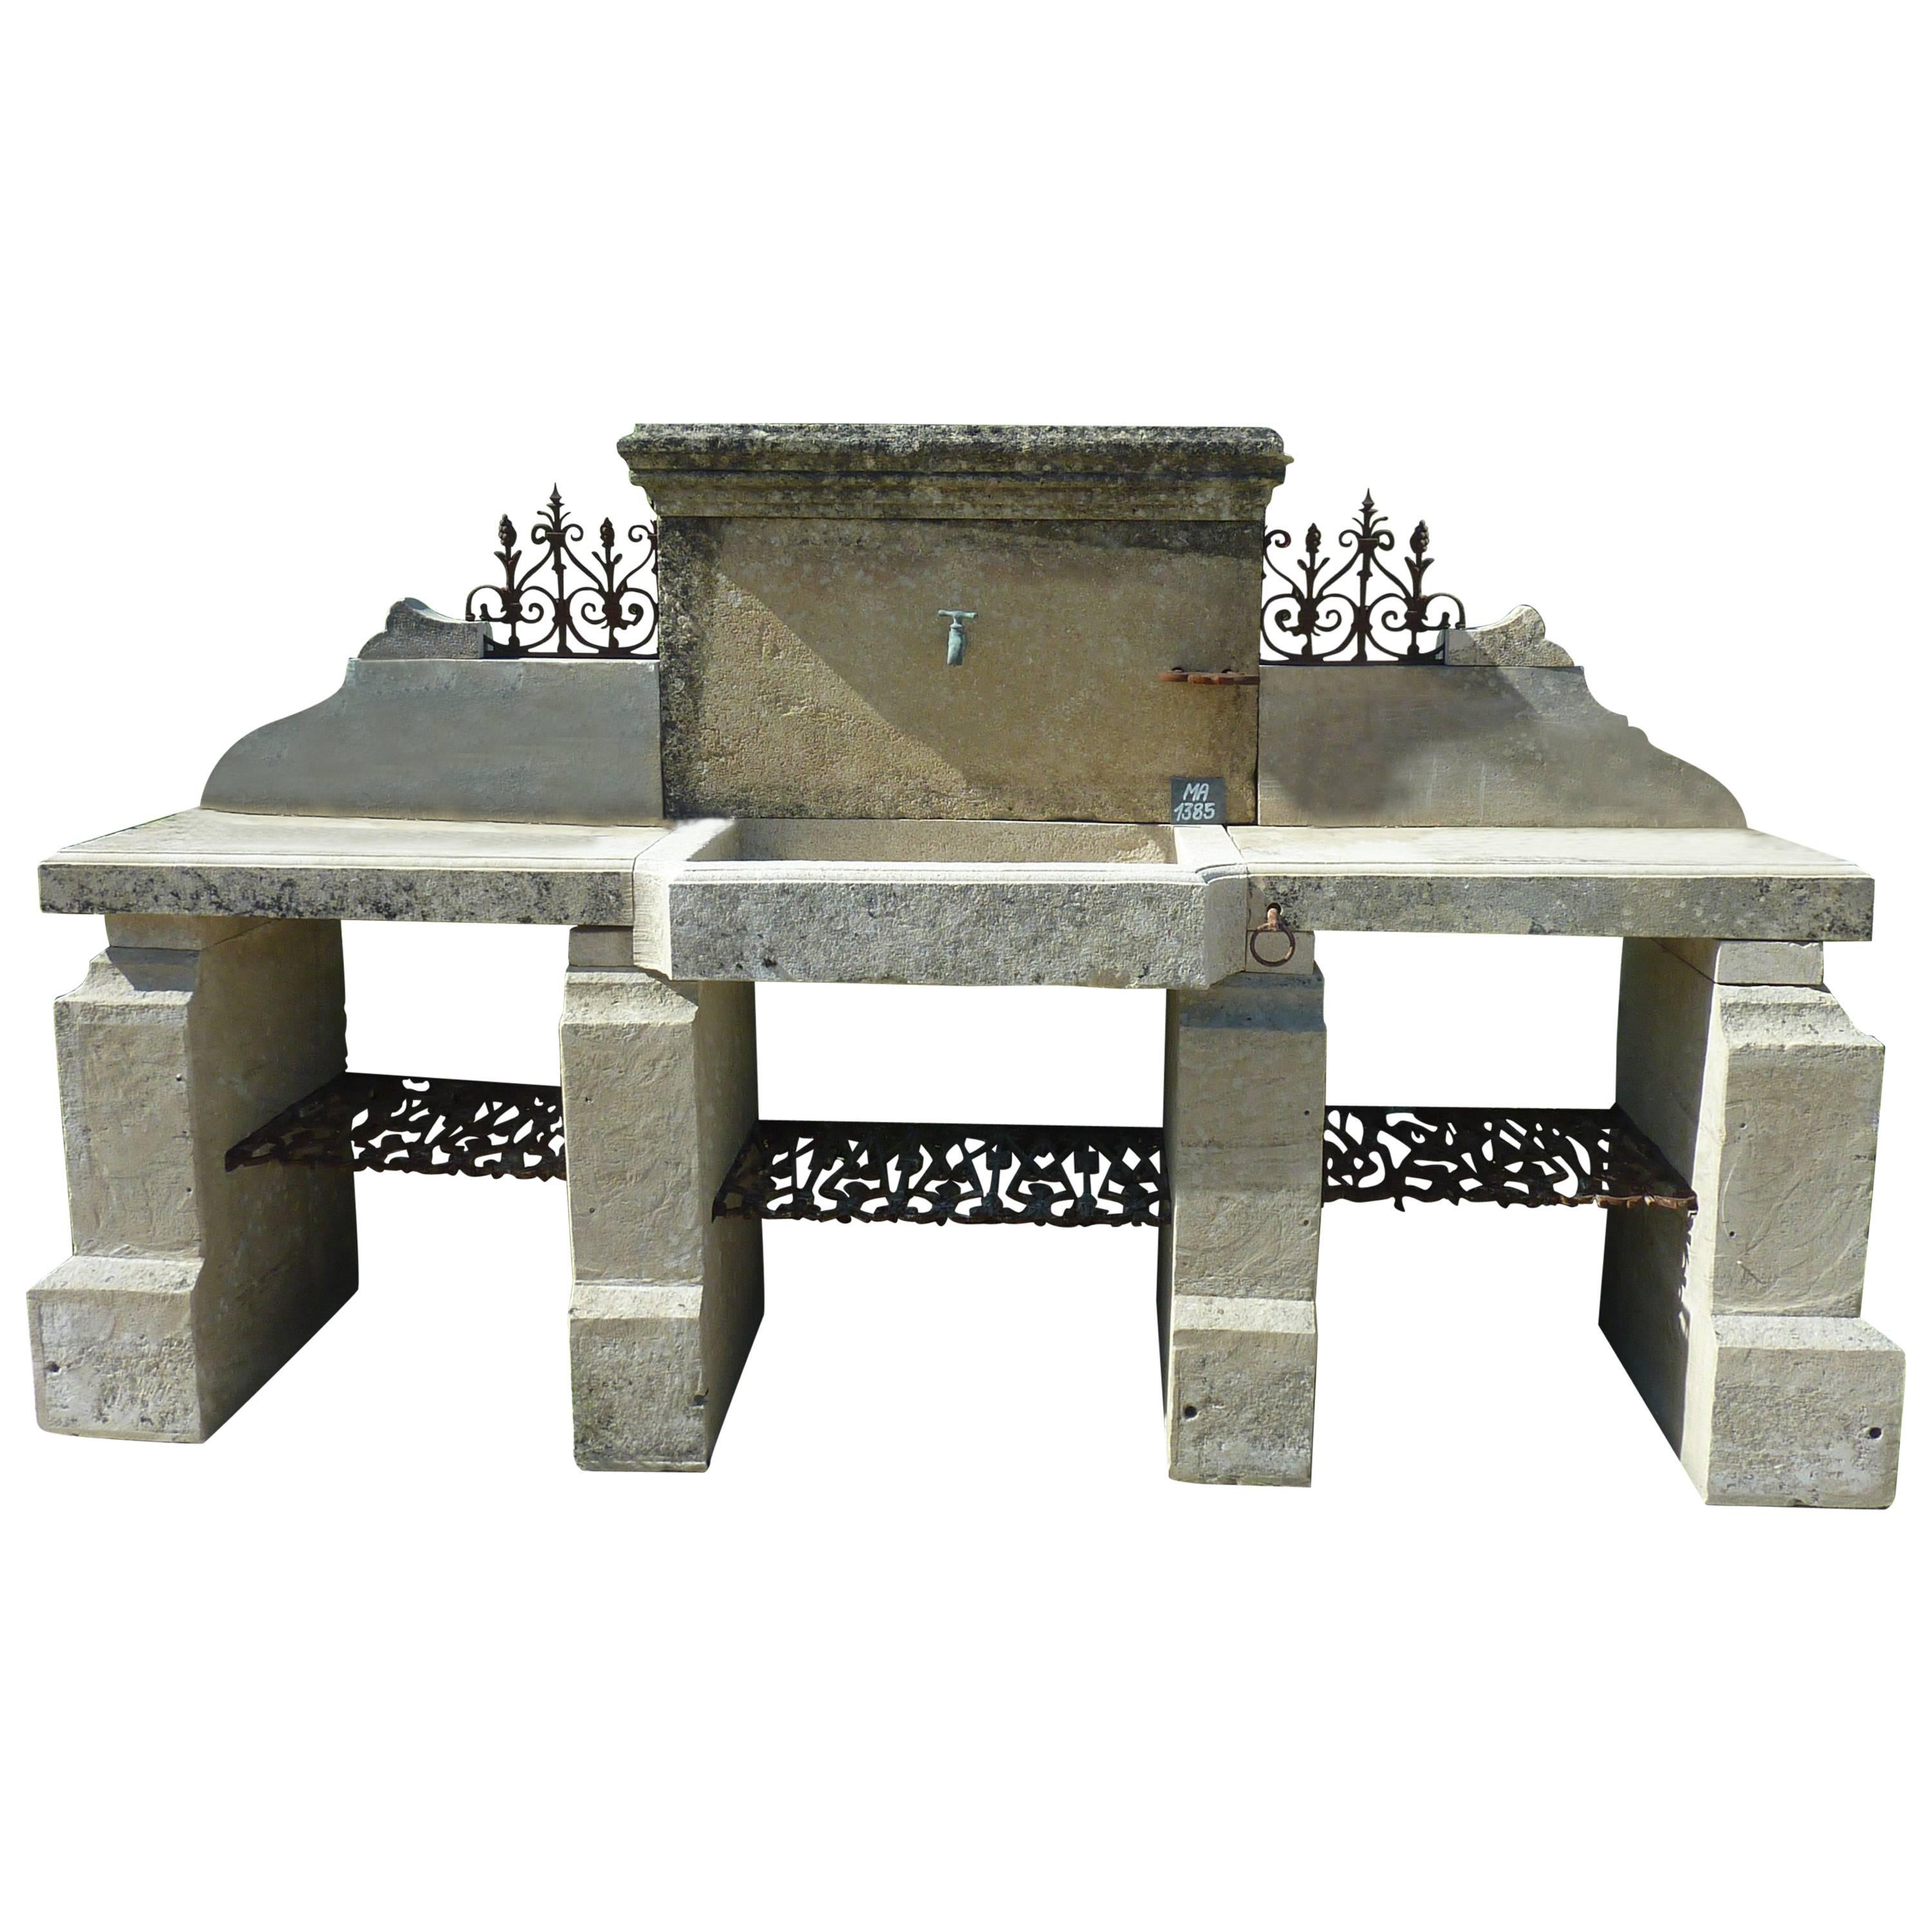 Aged Stone Summer Kitchen with Monolith Sink, Working Plans, Legs and Pediment